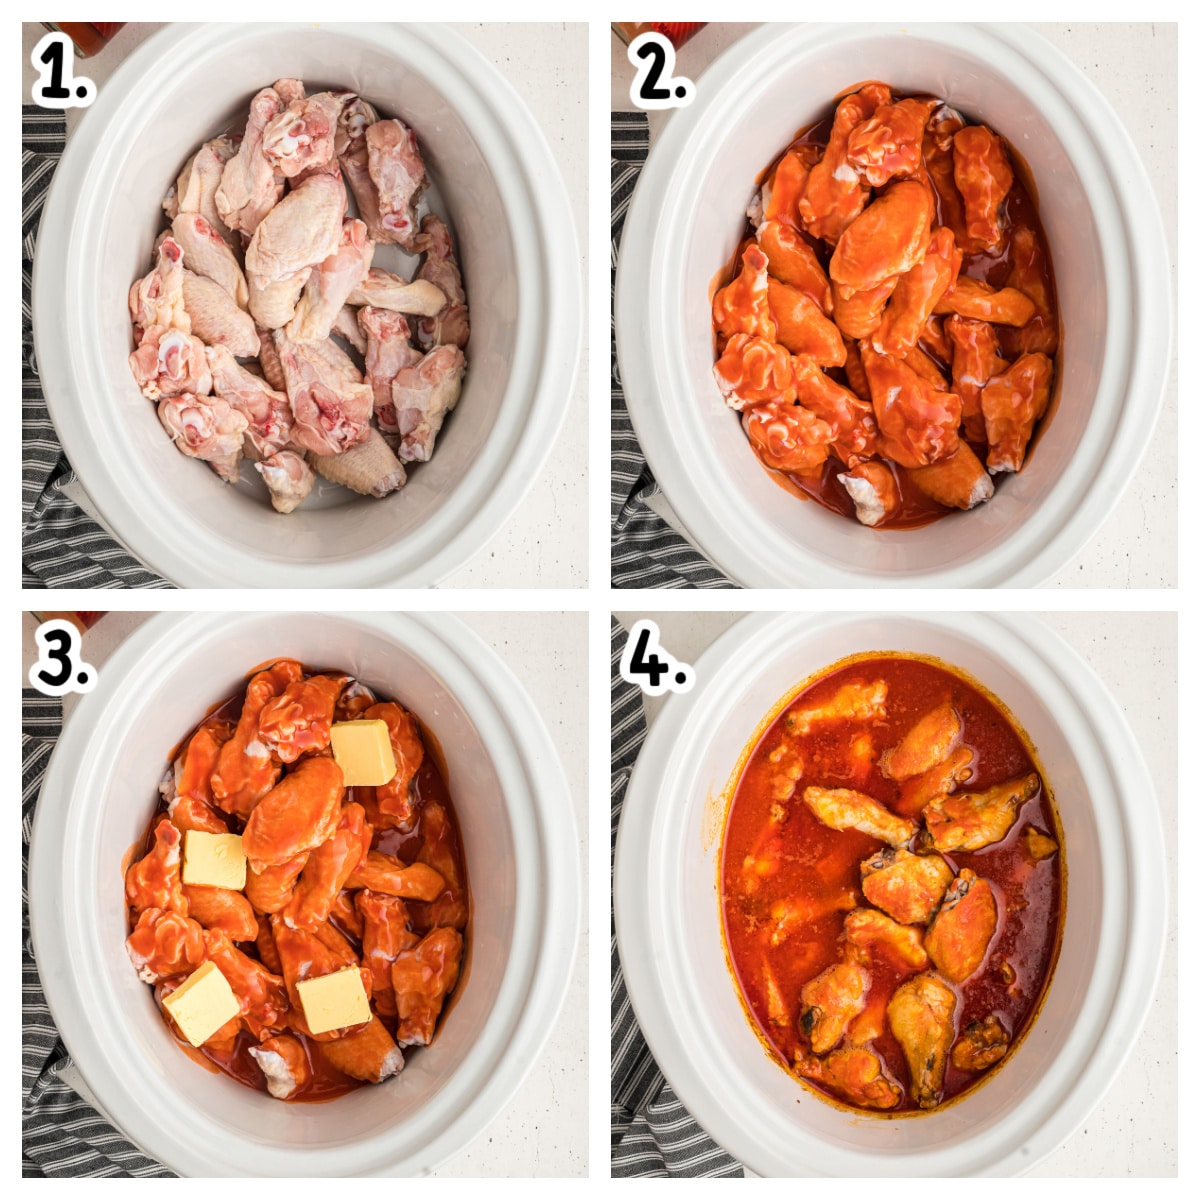 4 images showing how to make buffalo wings in a crockpot.